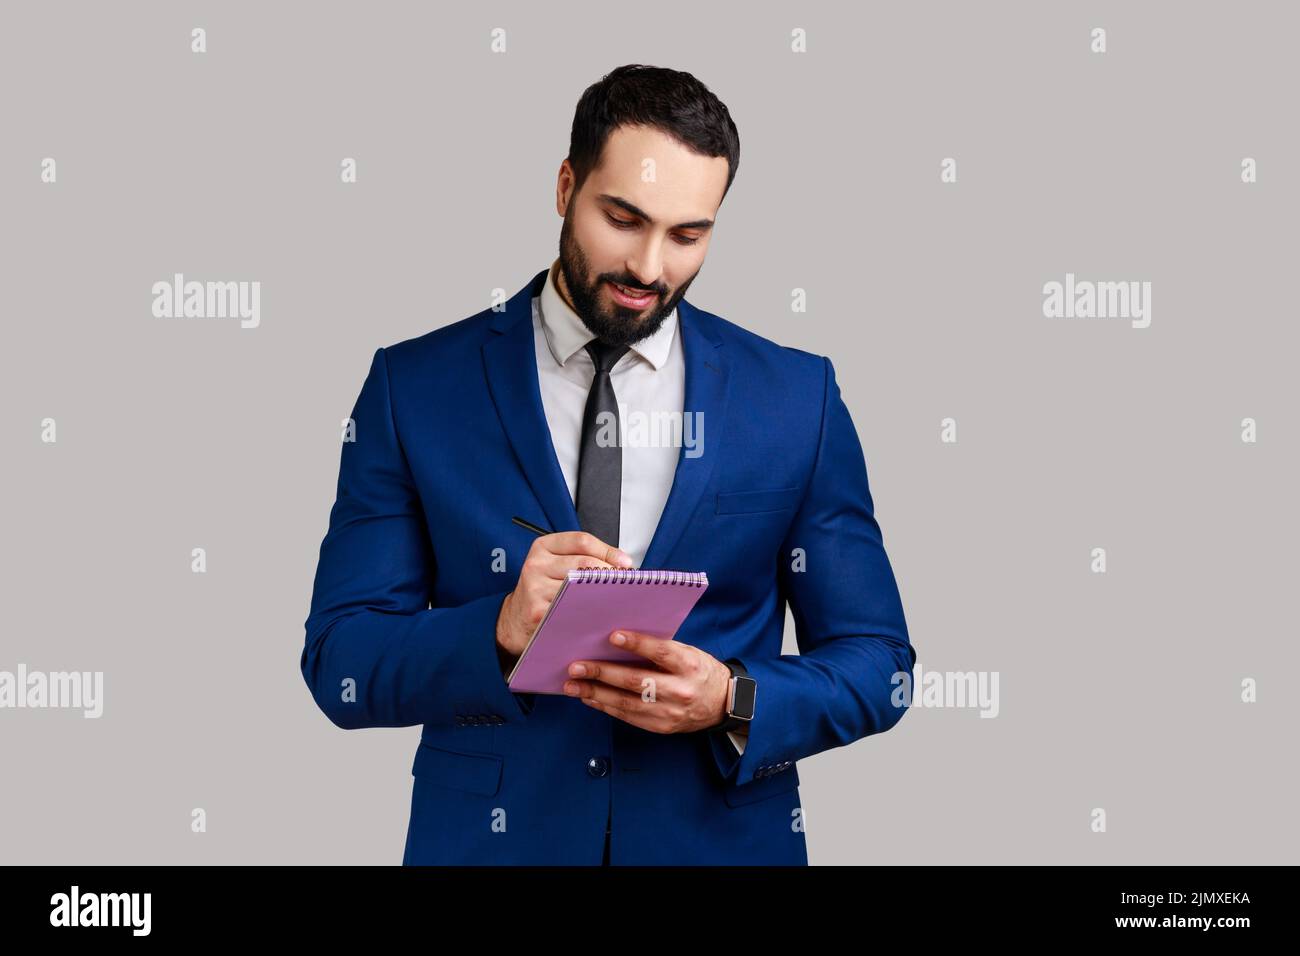 Portrait of positive bearded businessman writing down in paper notebook, making to do list, having good mood, wearing official style suit. Indoor studio shot isolated on gray background. Stock Photo